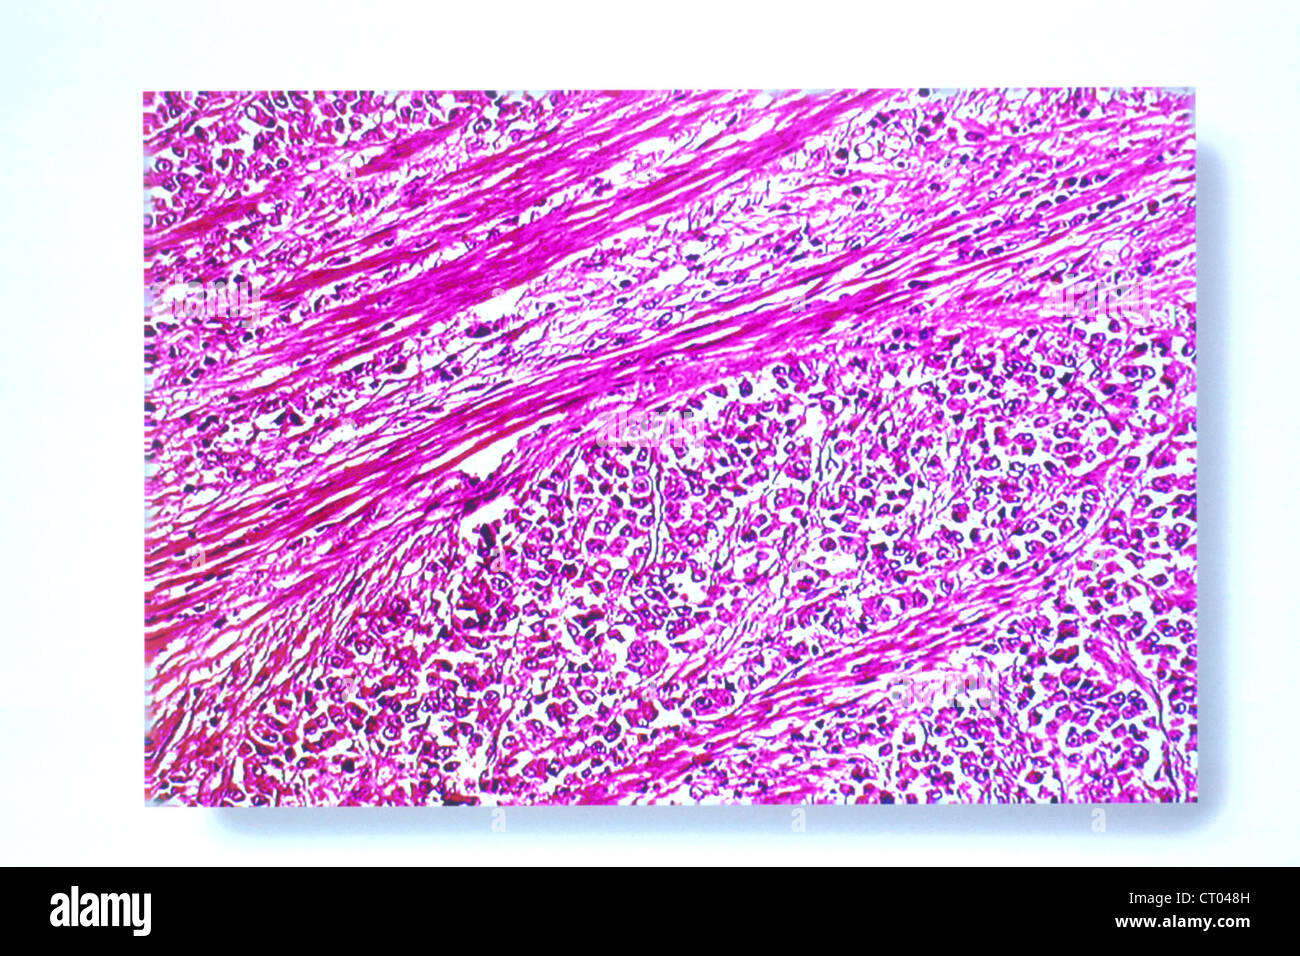 CANCER OF THE STOMACH, HISTOLOGY Stock Photo - Alamy